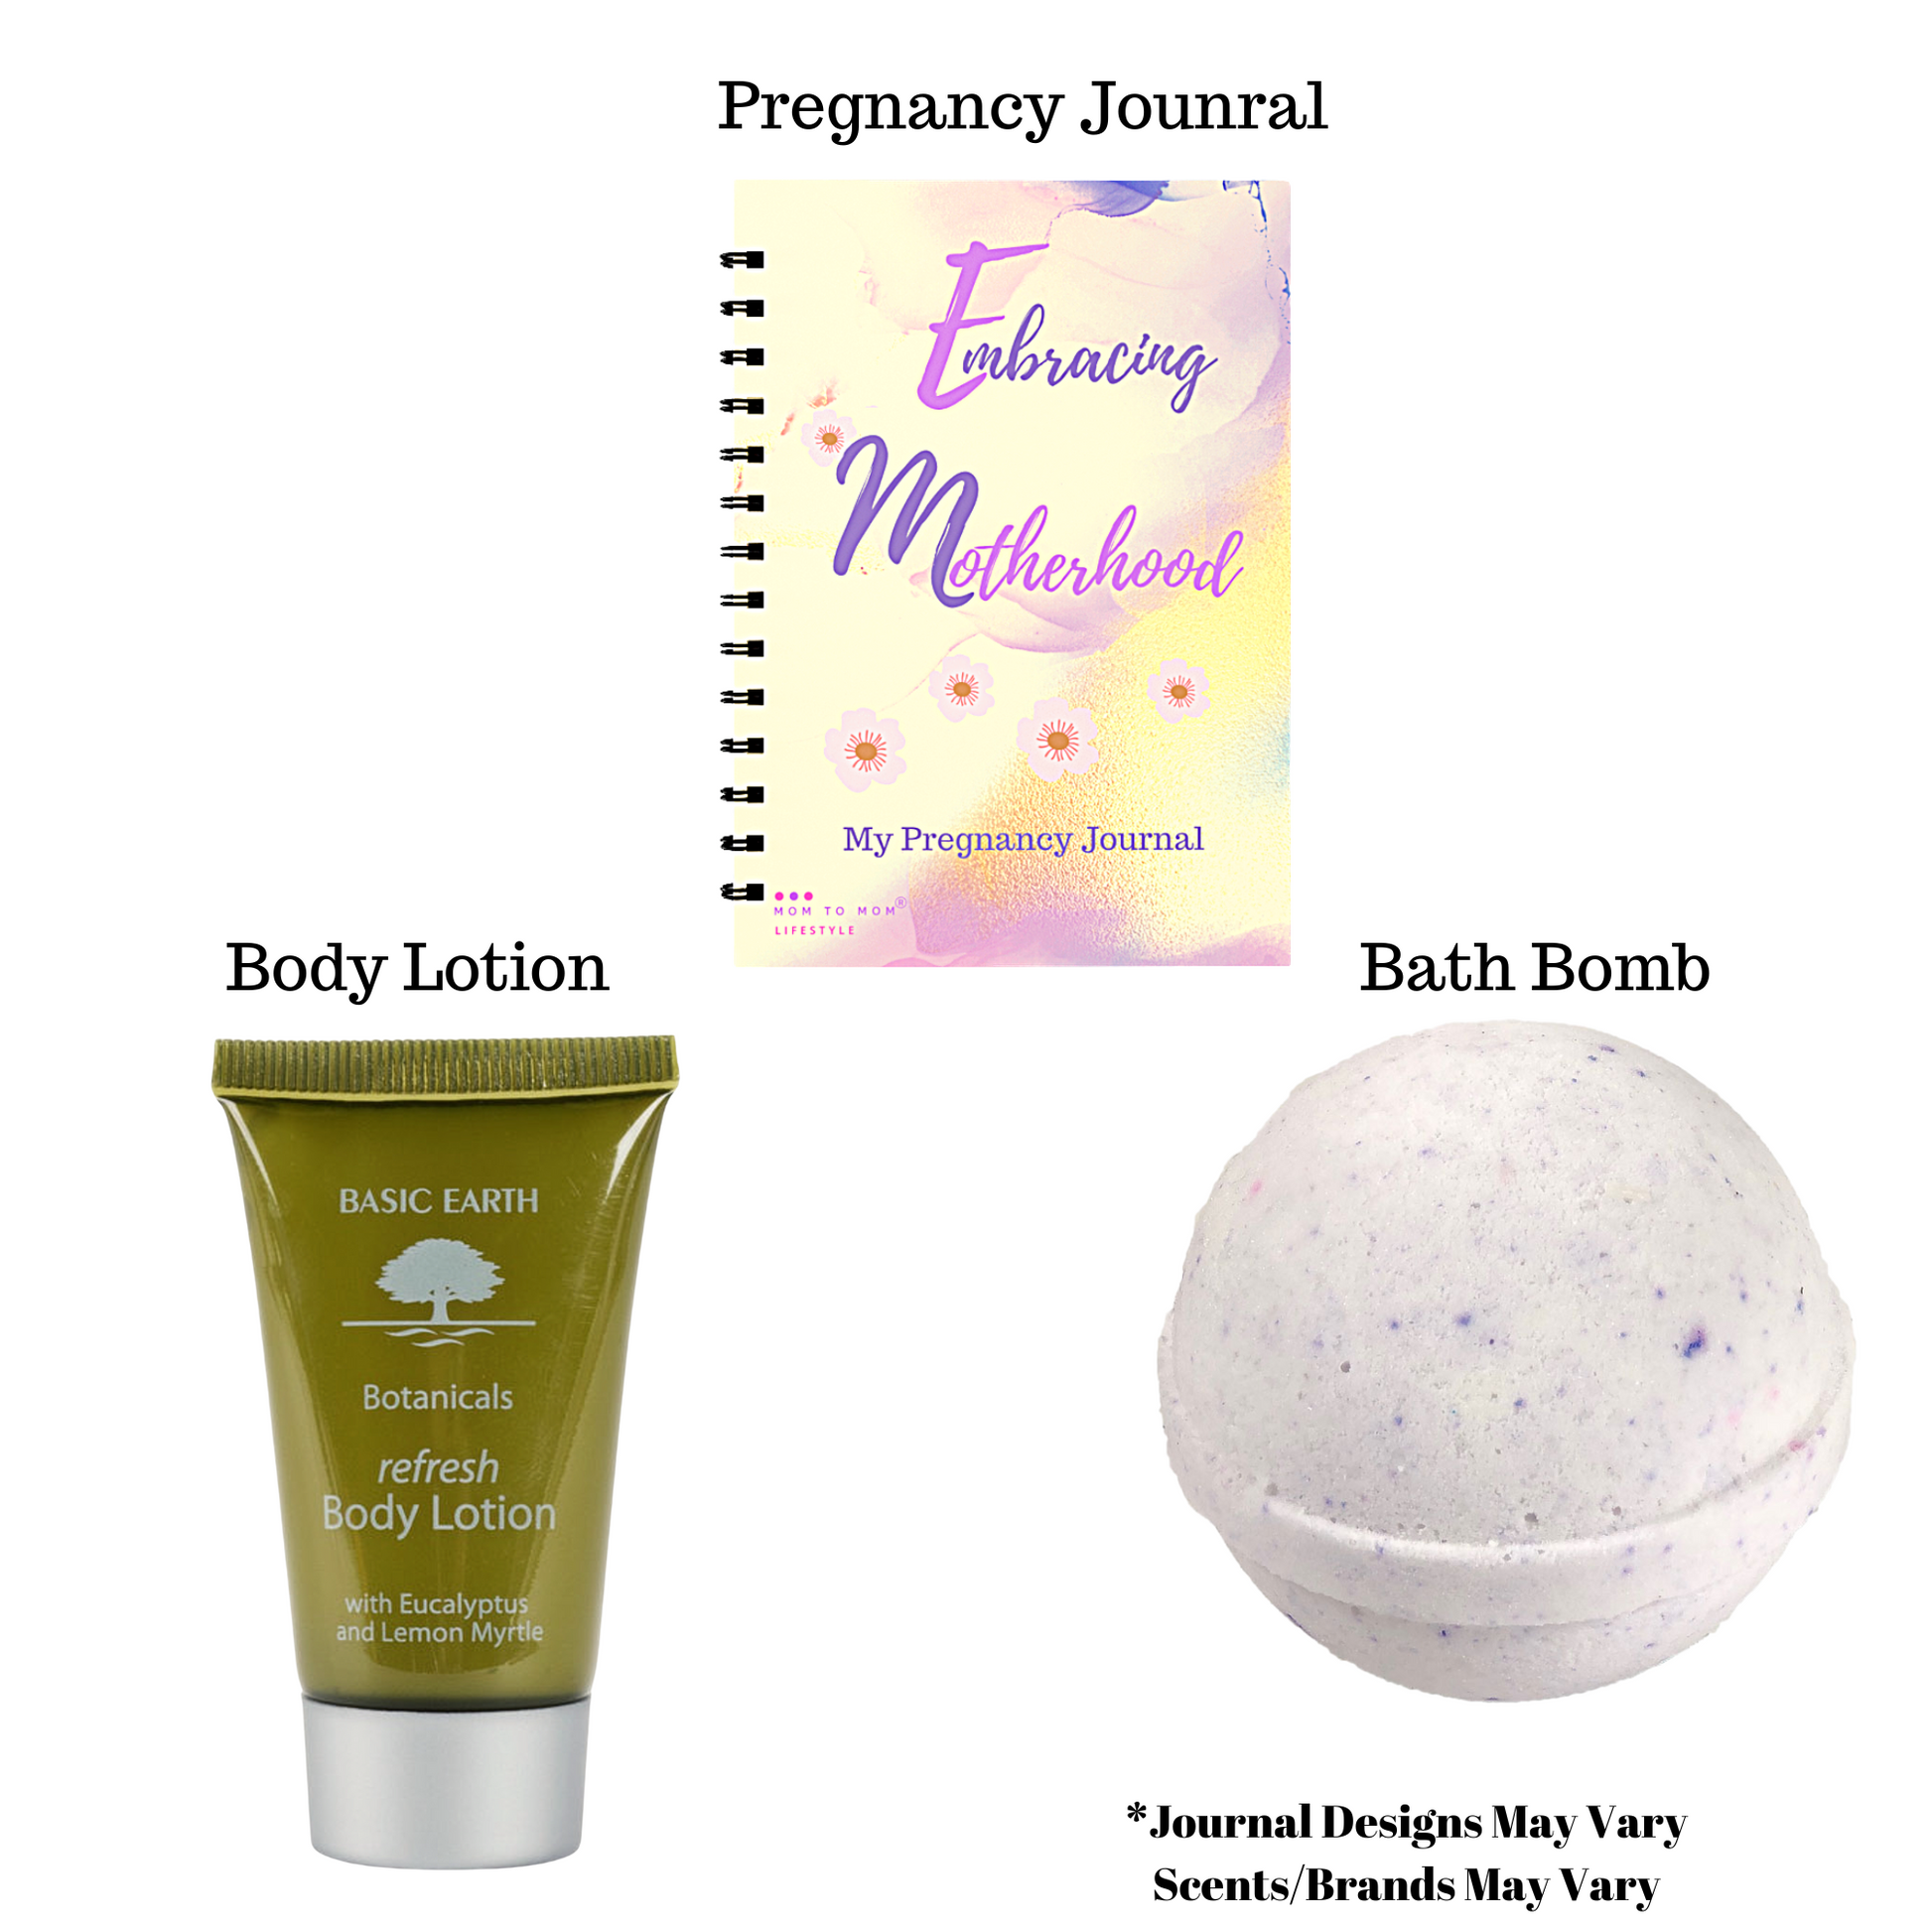 pregnancy journal body lotion bath bomb for selfcare for pregnant lady houston texas hey you gift box gift shop